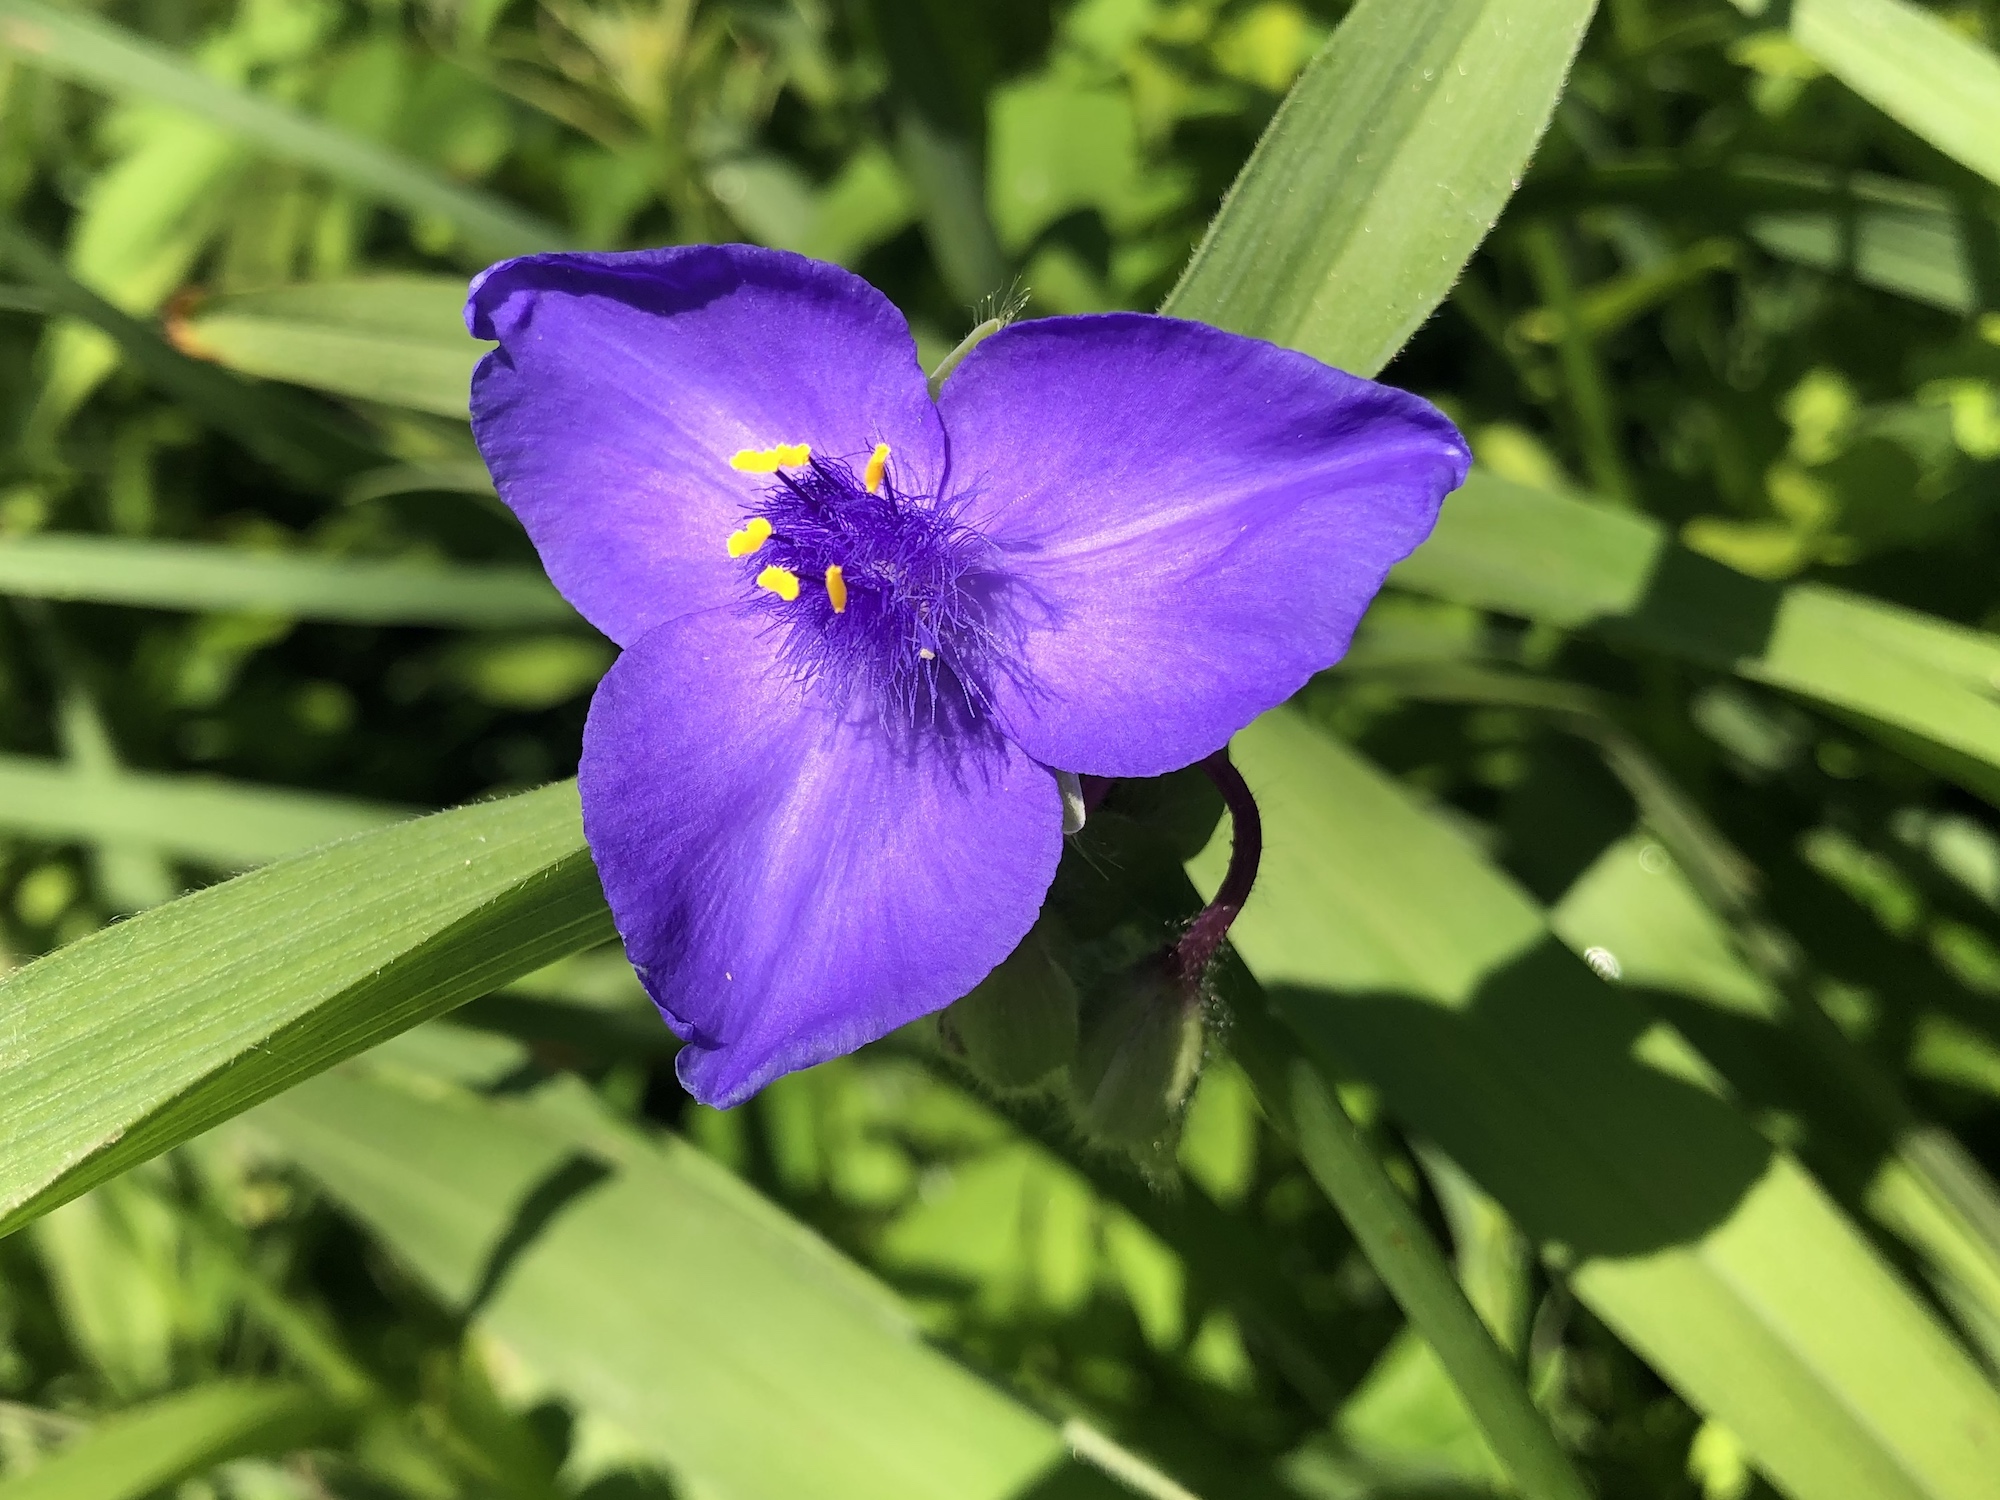 Spiderwort along stone walls and steps of Duck Pond in Madison, Wisconsin on June 8, 2019.